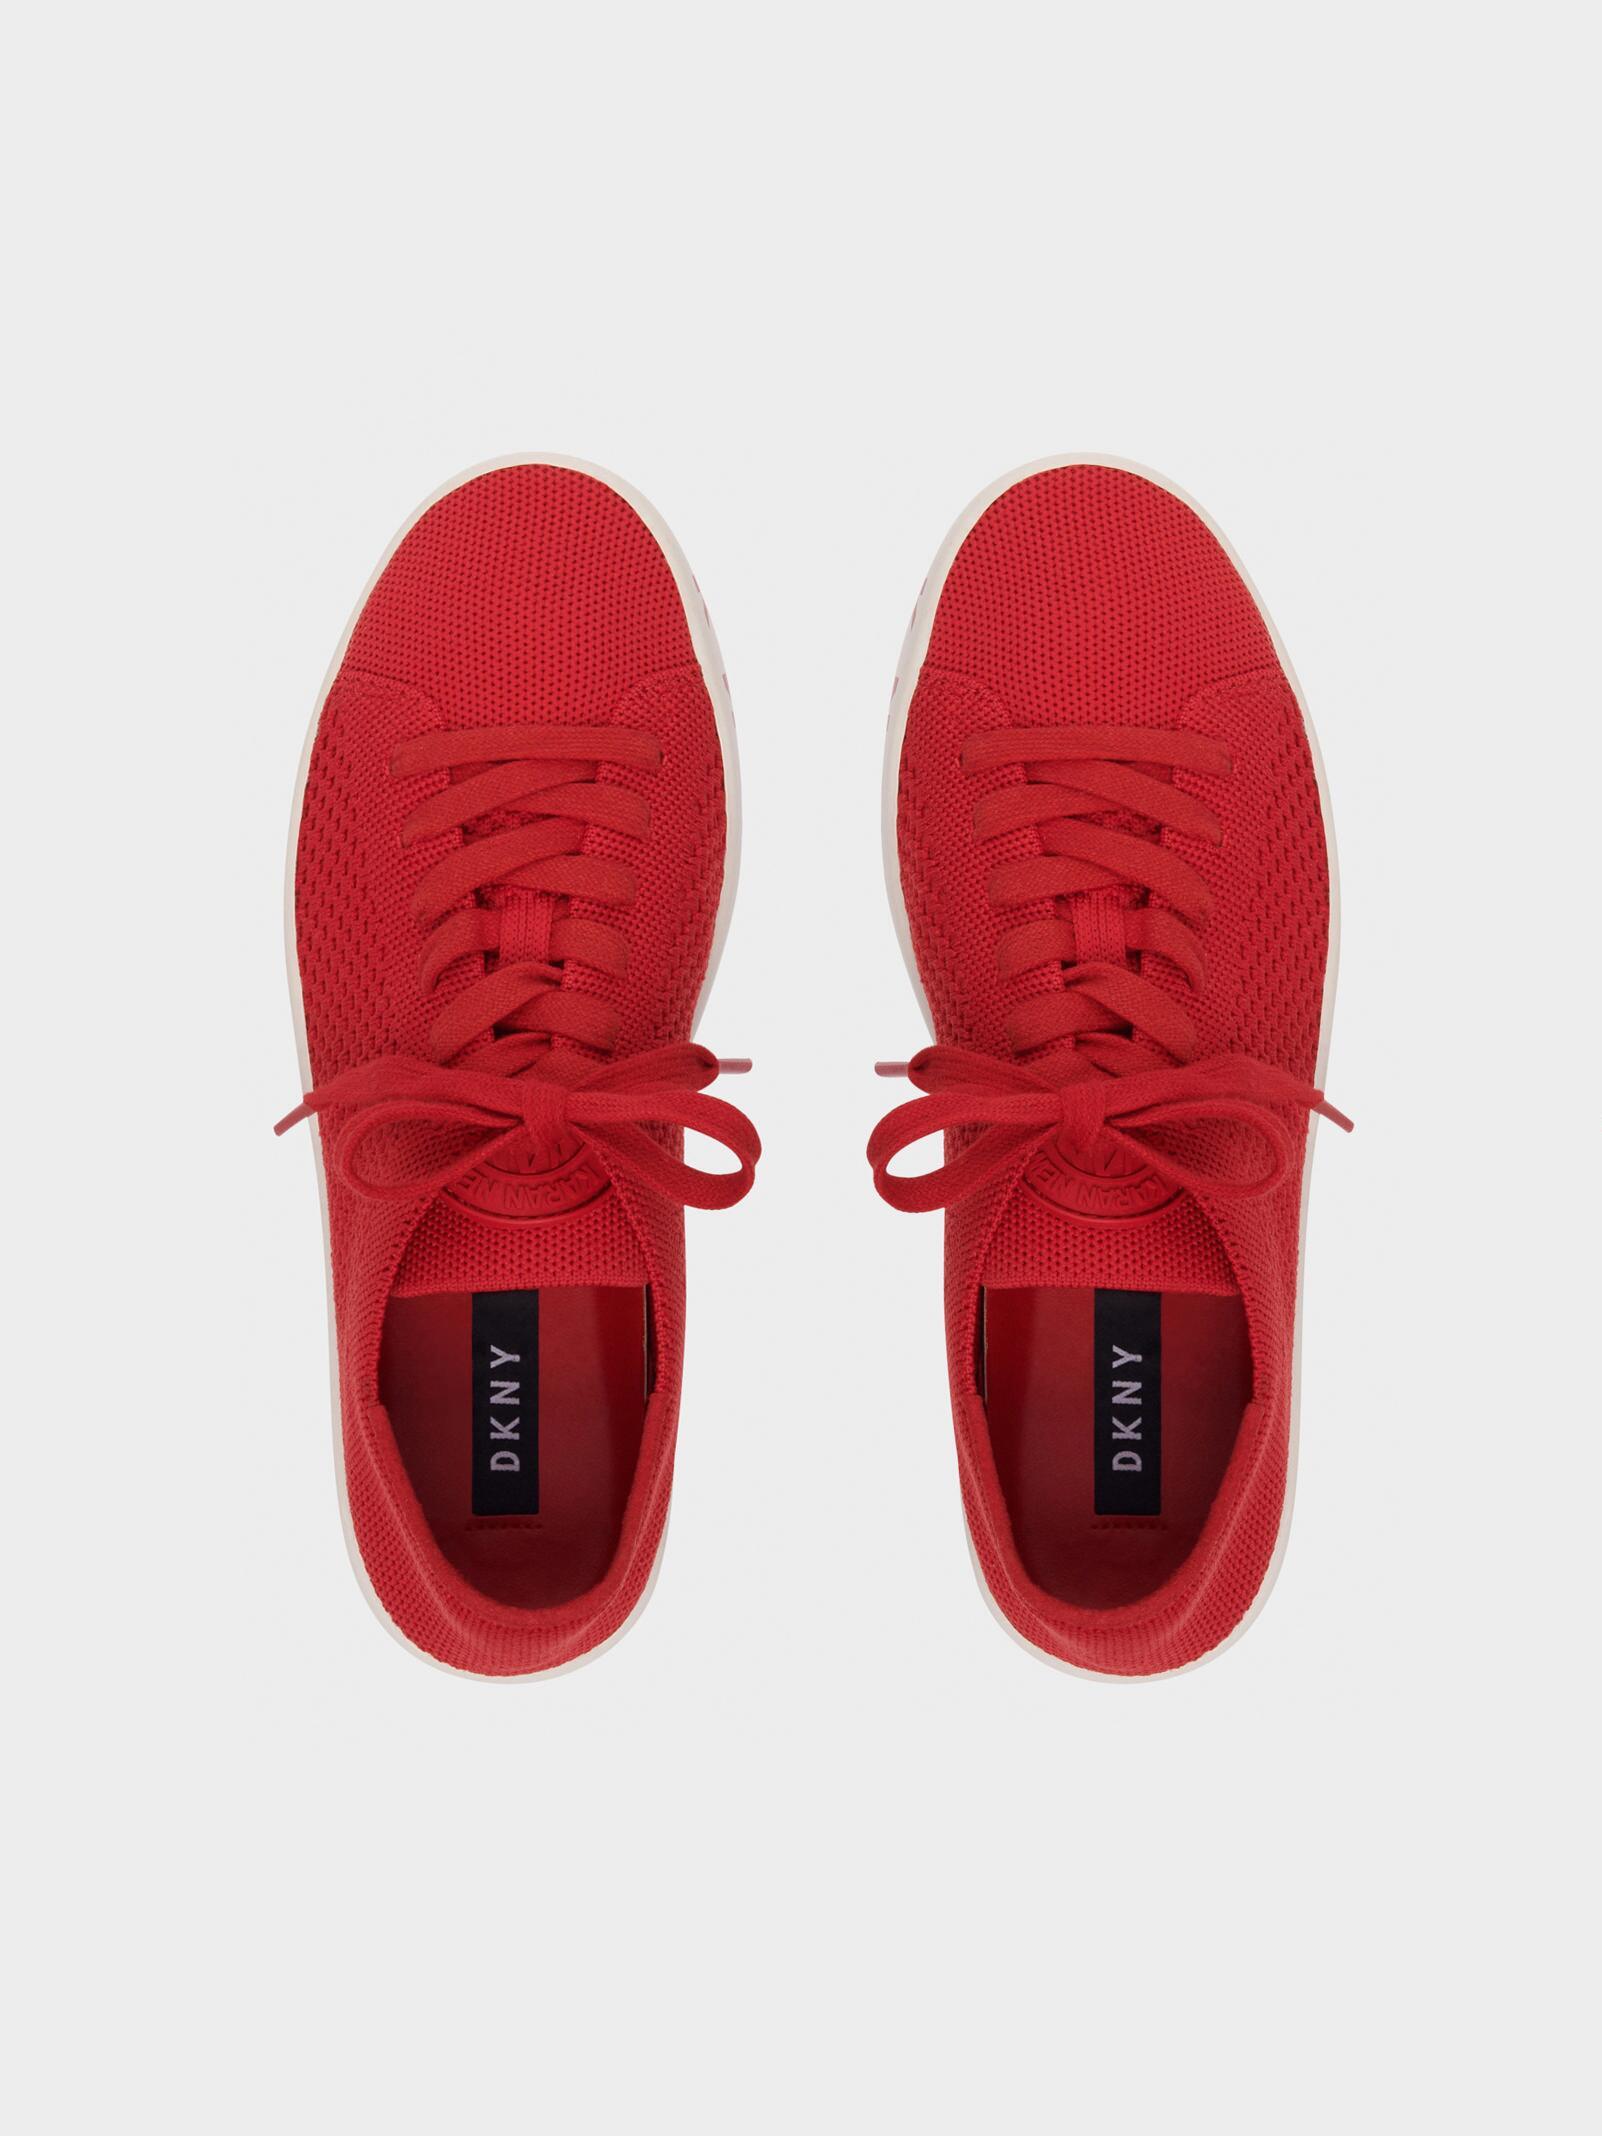 dkny red sneakers closeout e0f20 6af48